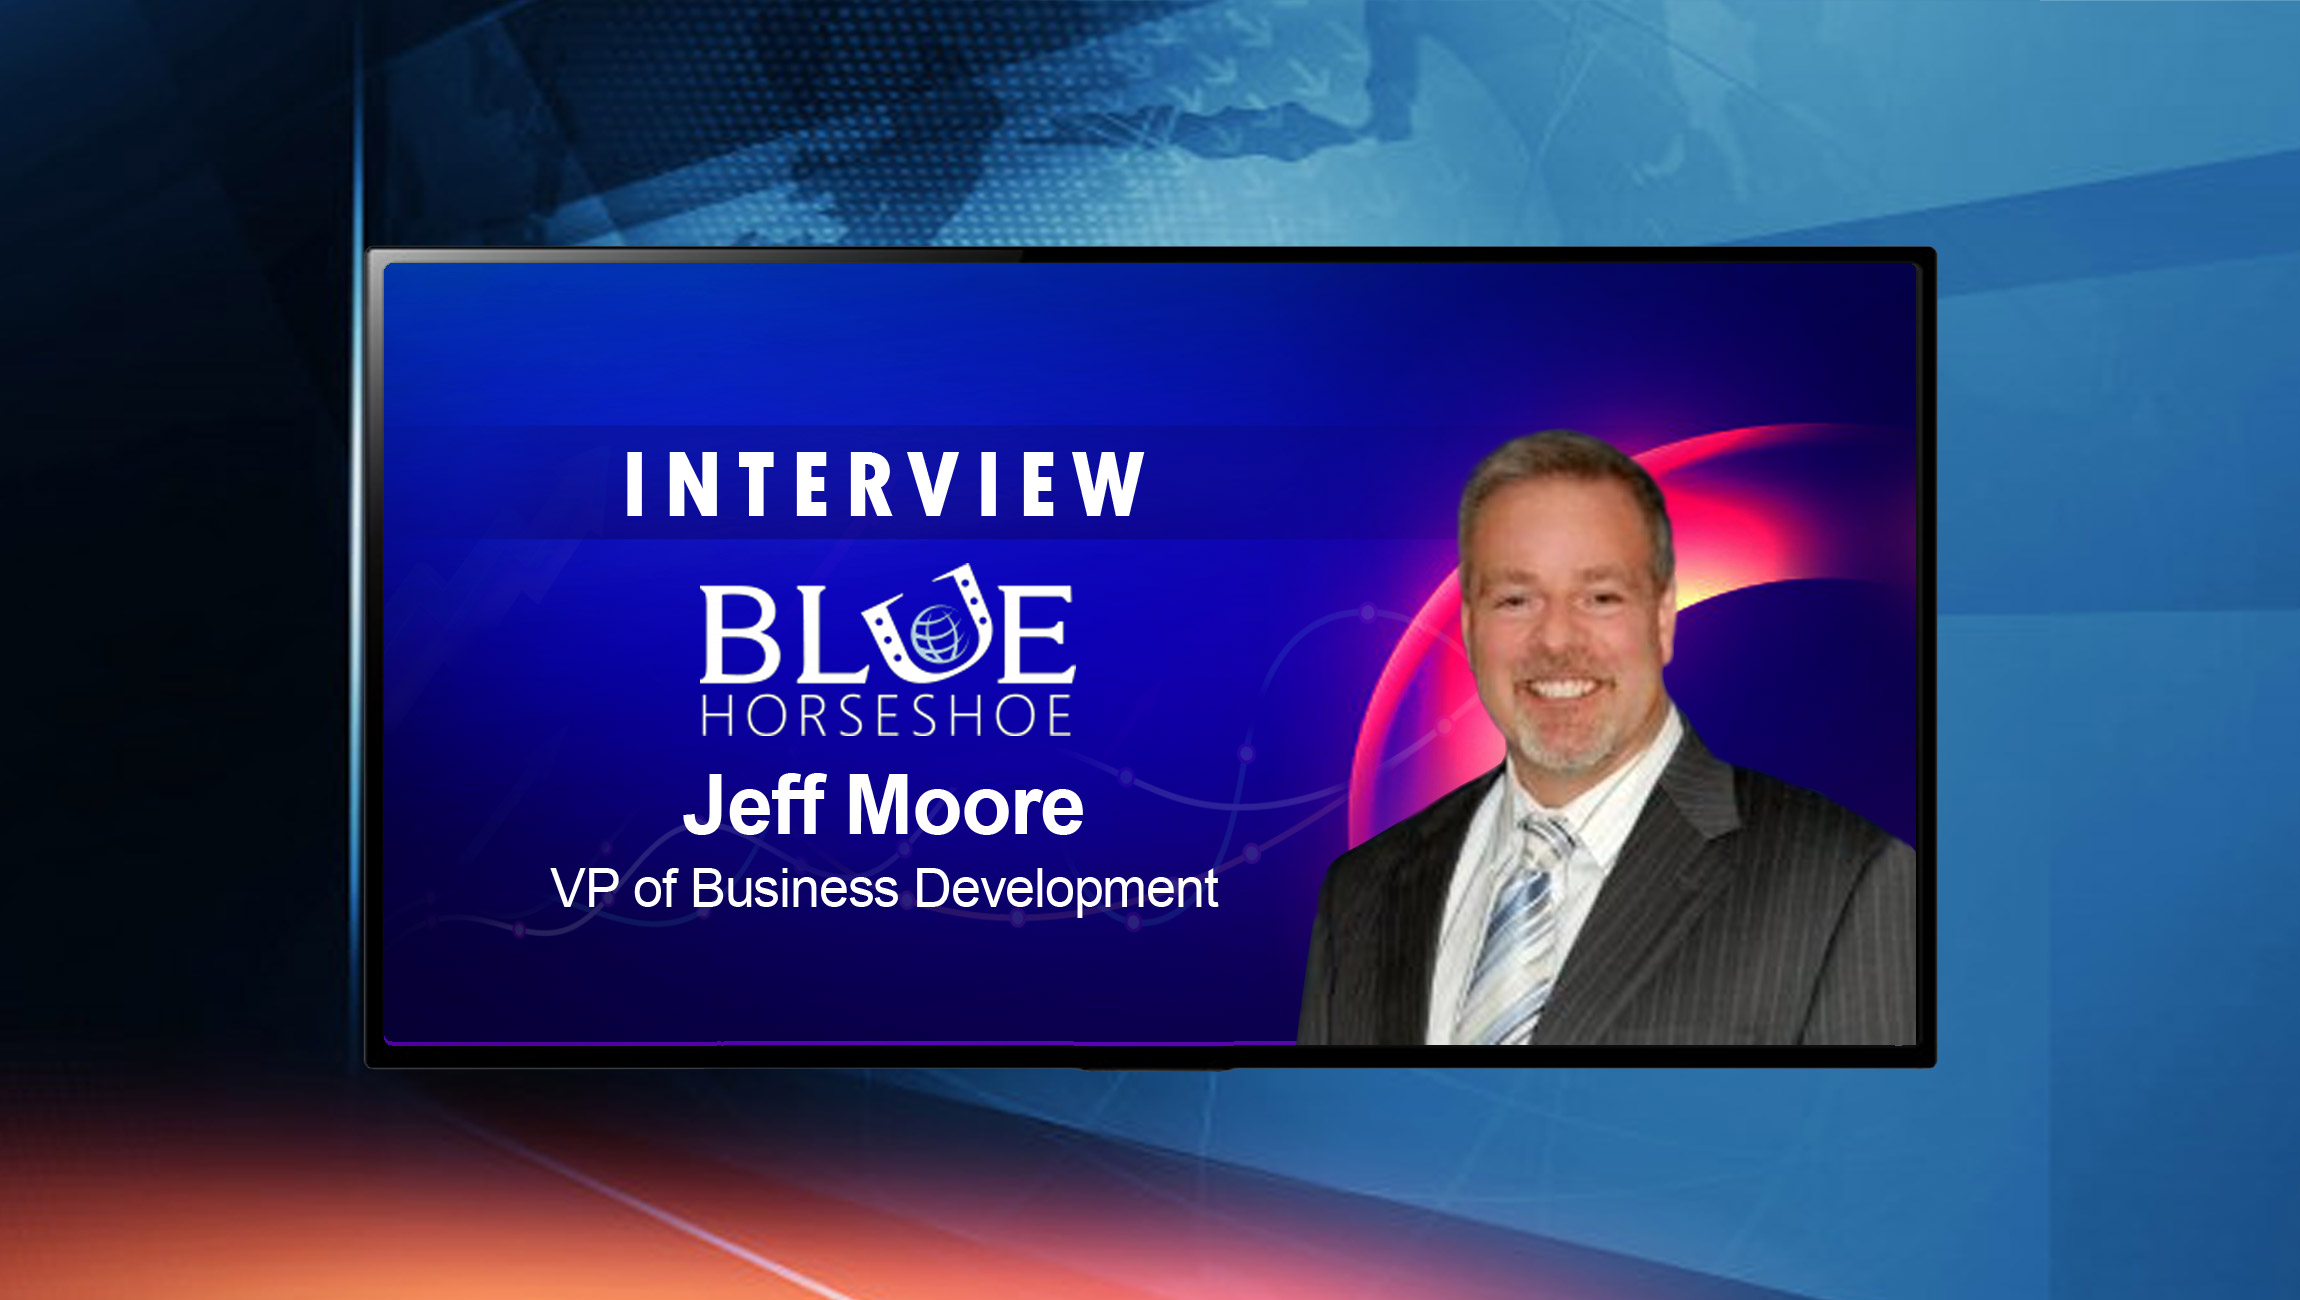 SalesTechStar Interview with Jeff Moore, VP of Business Development at Blue Horseshoe